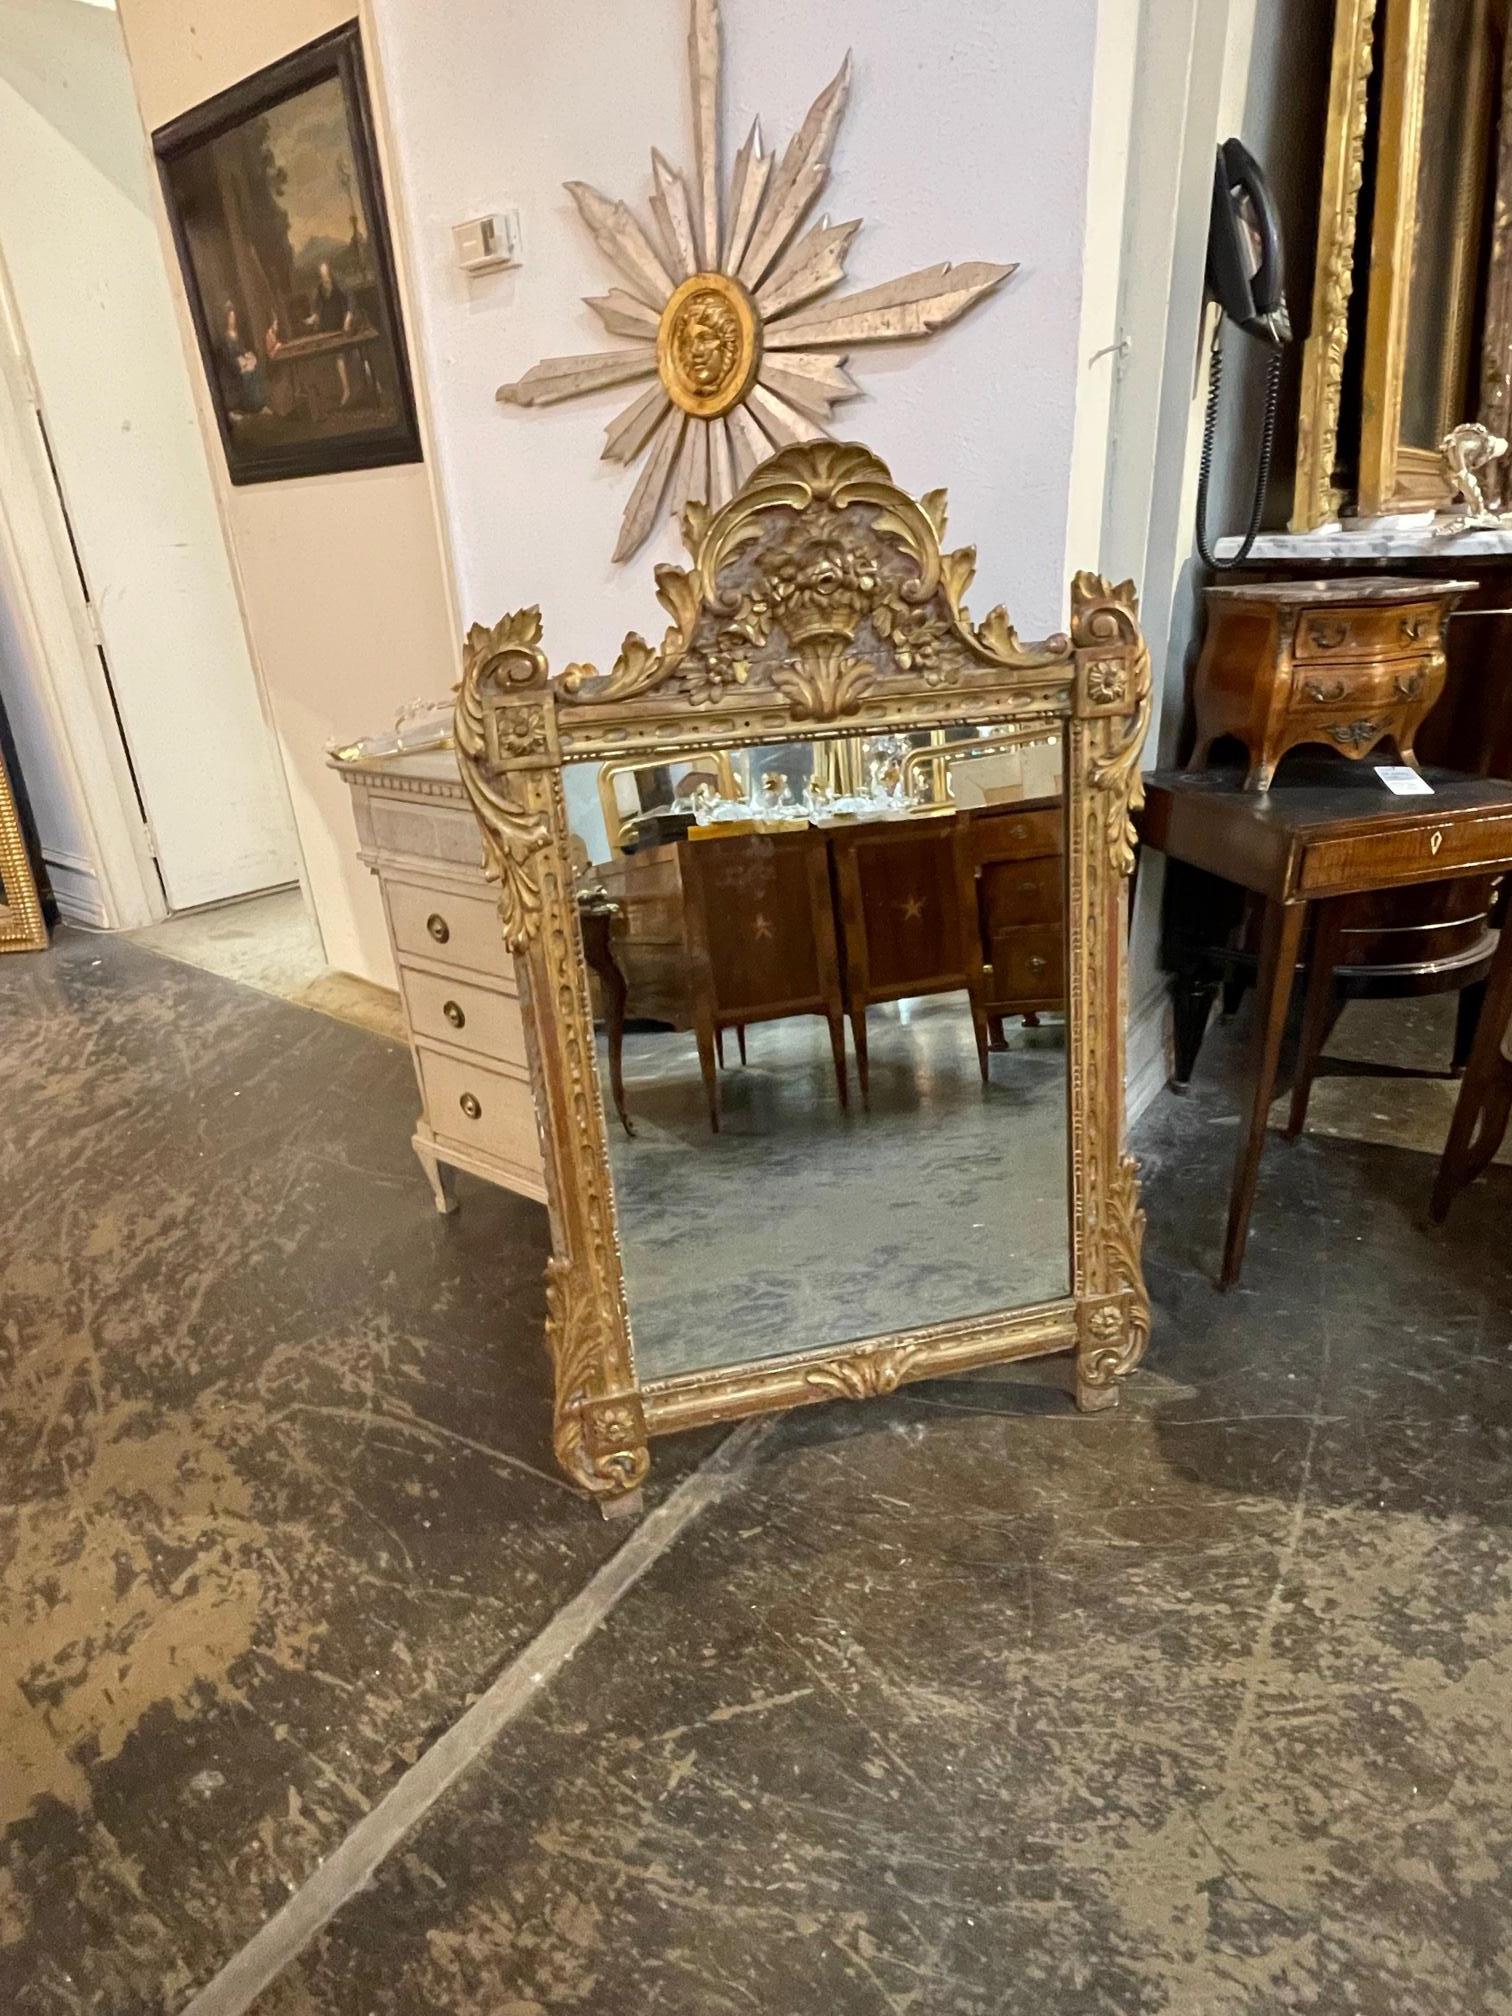 19th century Italian carved and giltwood mirror. Circa 1870. This is a fine quality nicely carved mirror. Sure to make a statement.